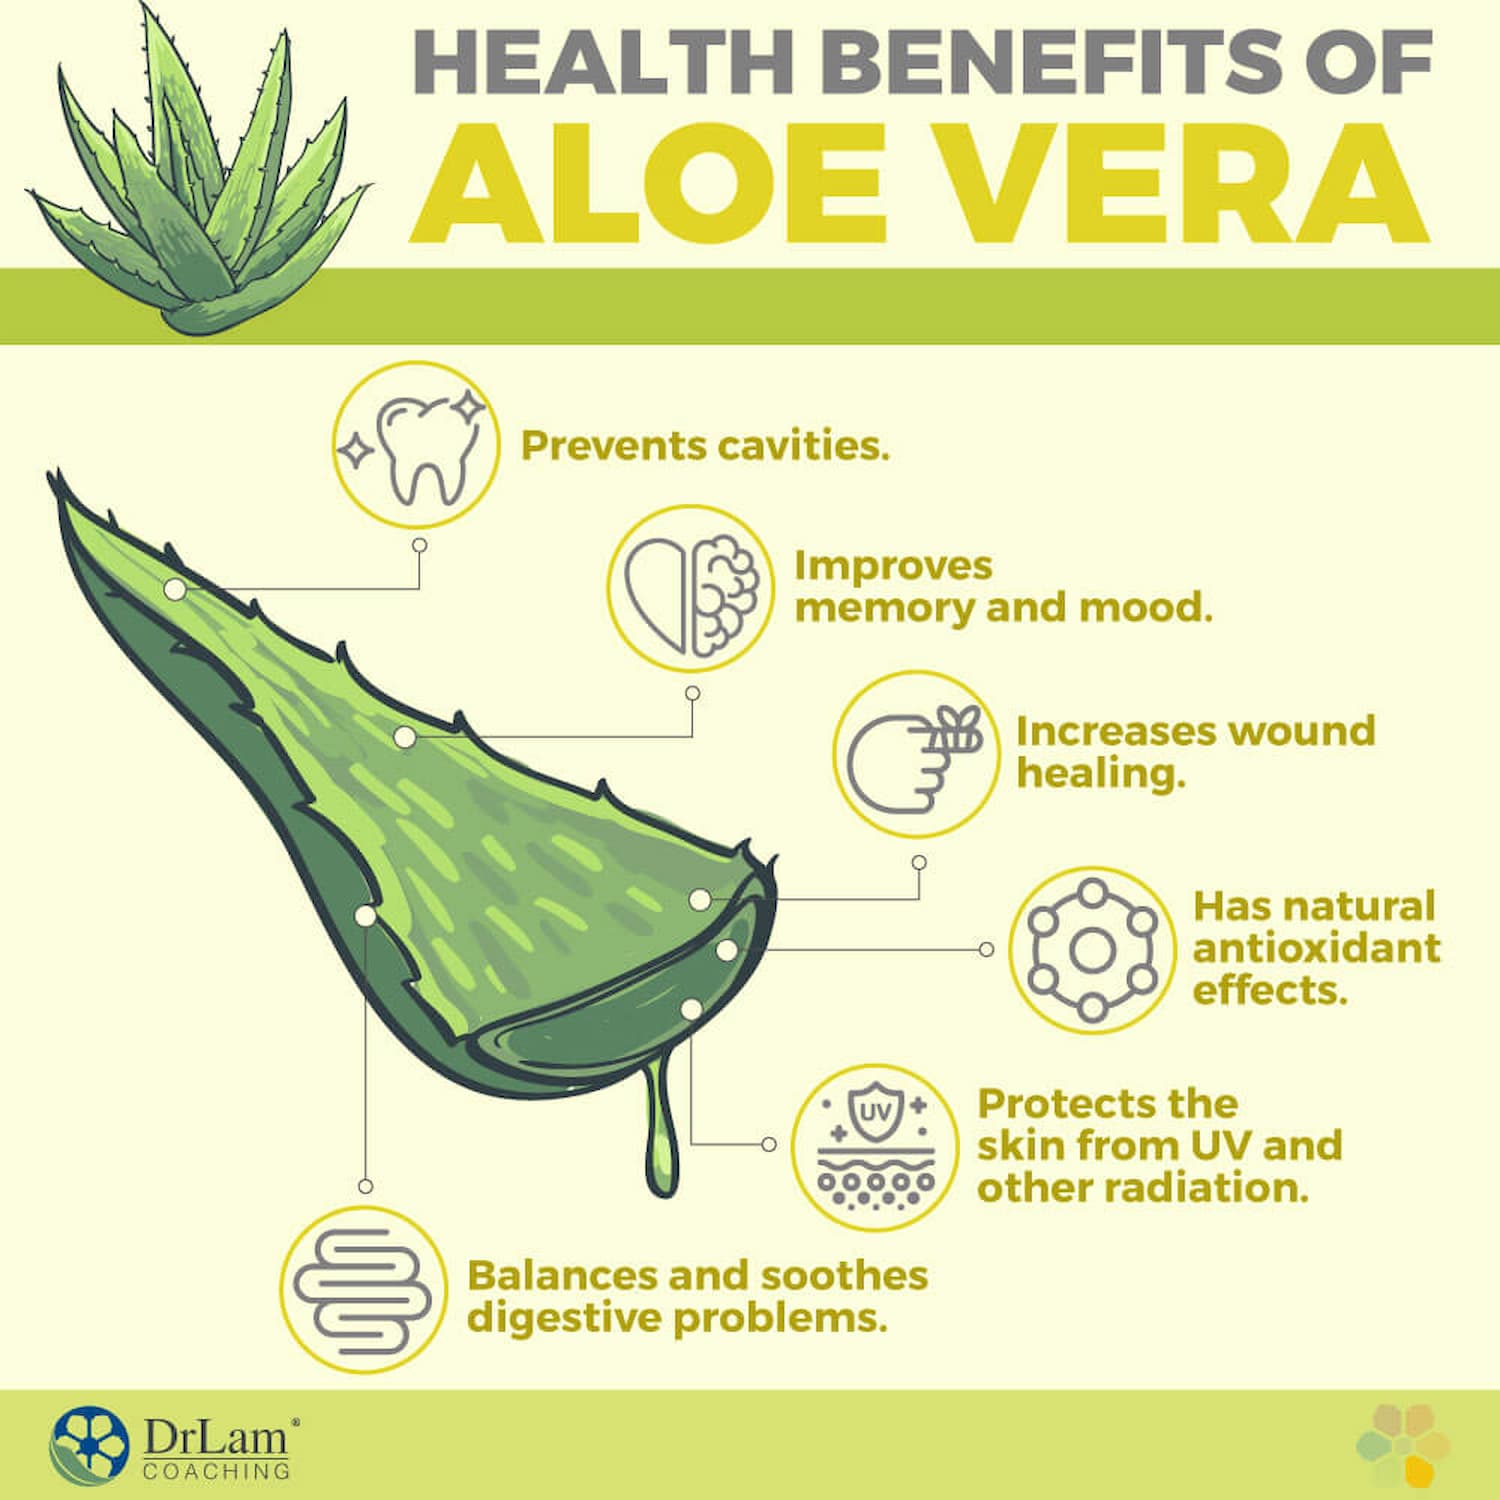 How using aloe vera can improve your health